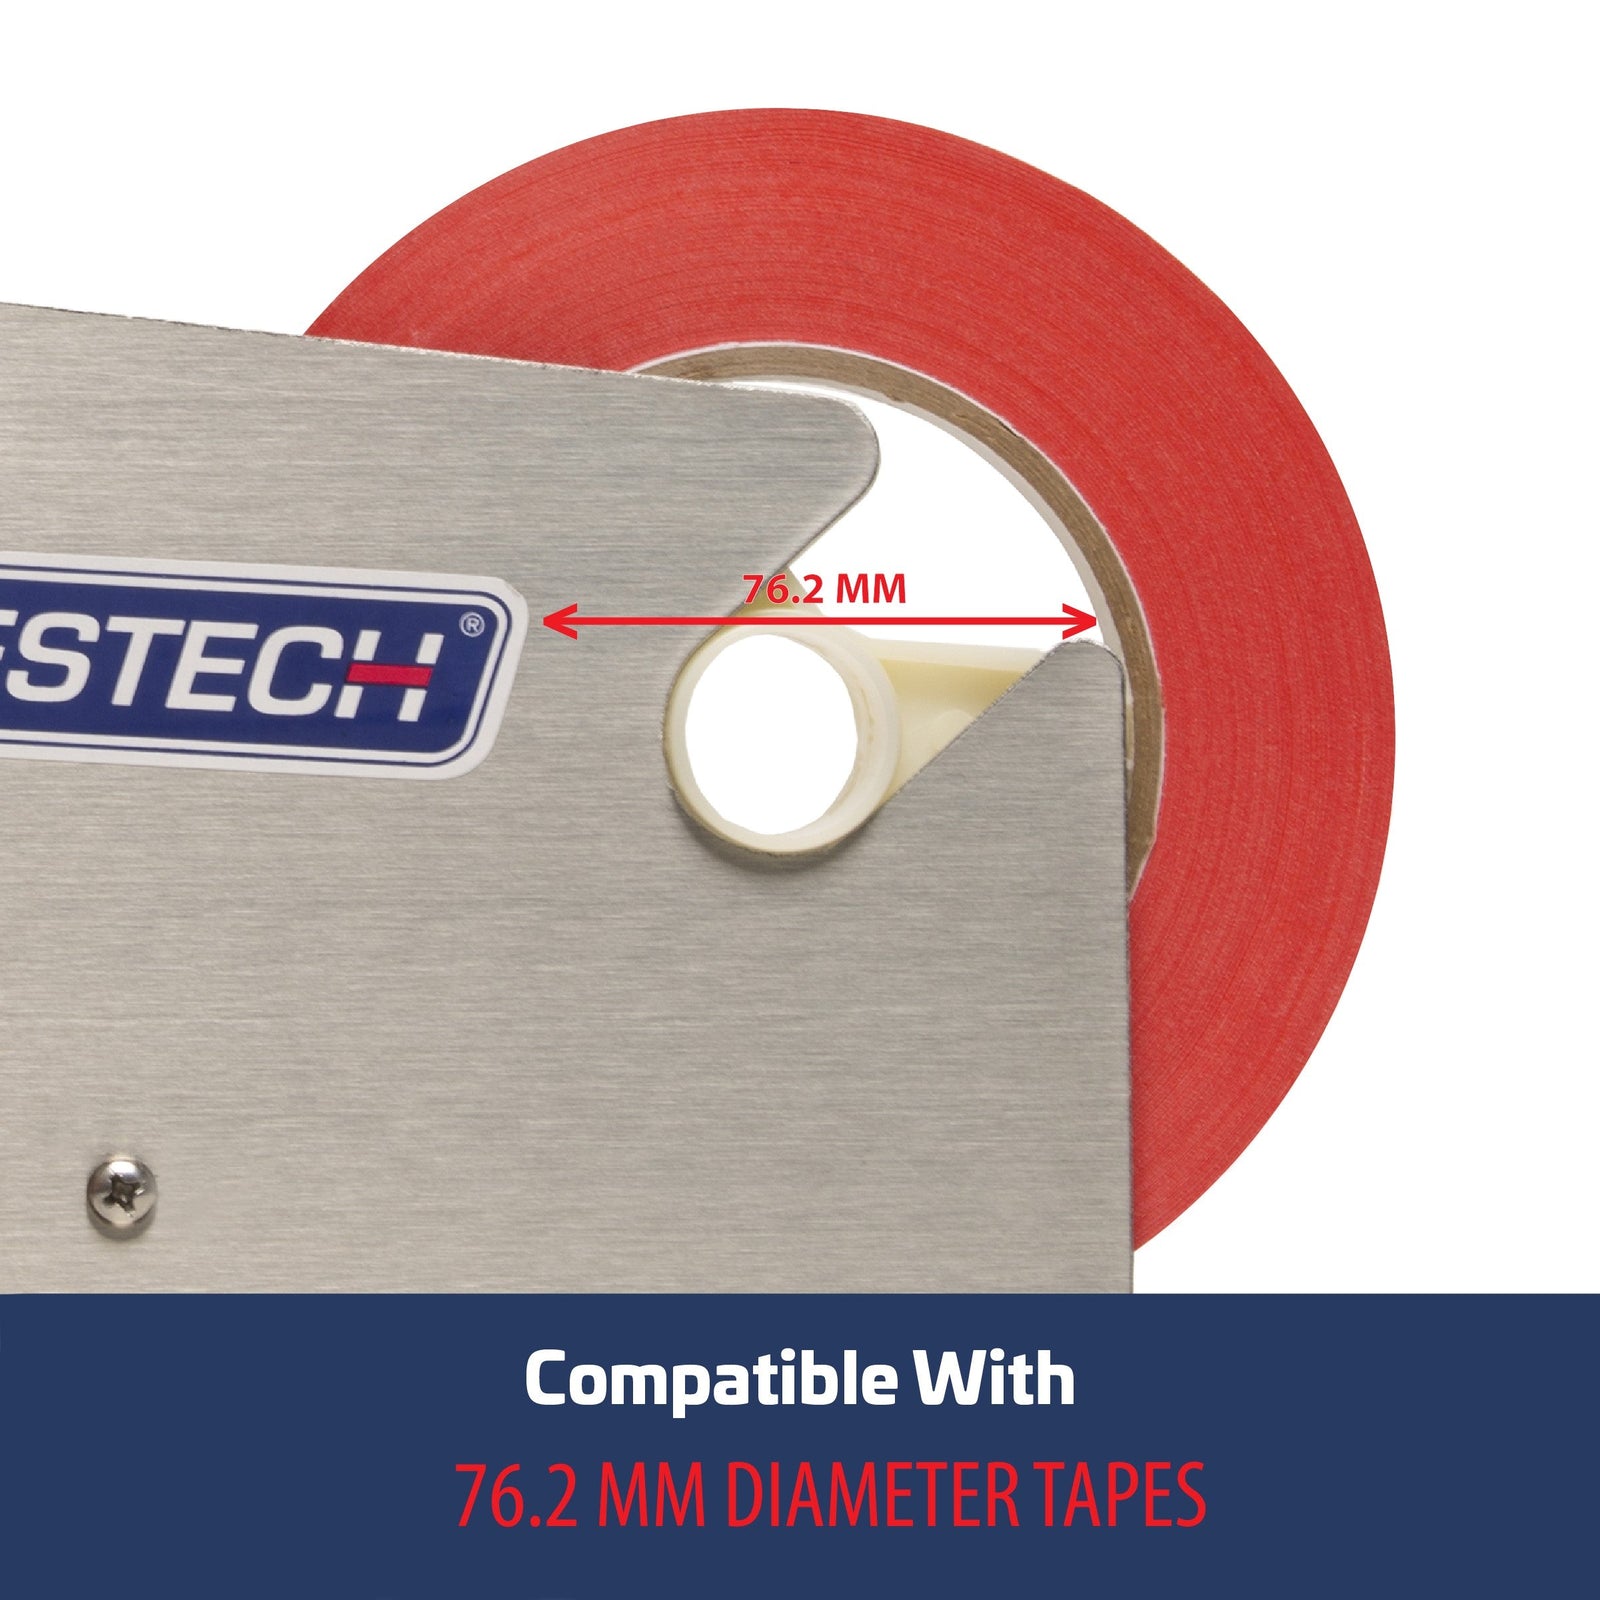 Close up of a red tape roll positioned in JORESTECH bag taper with blue bottom banner that says compatible with 76.2 mm diameter tapes